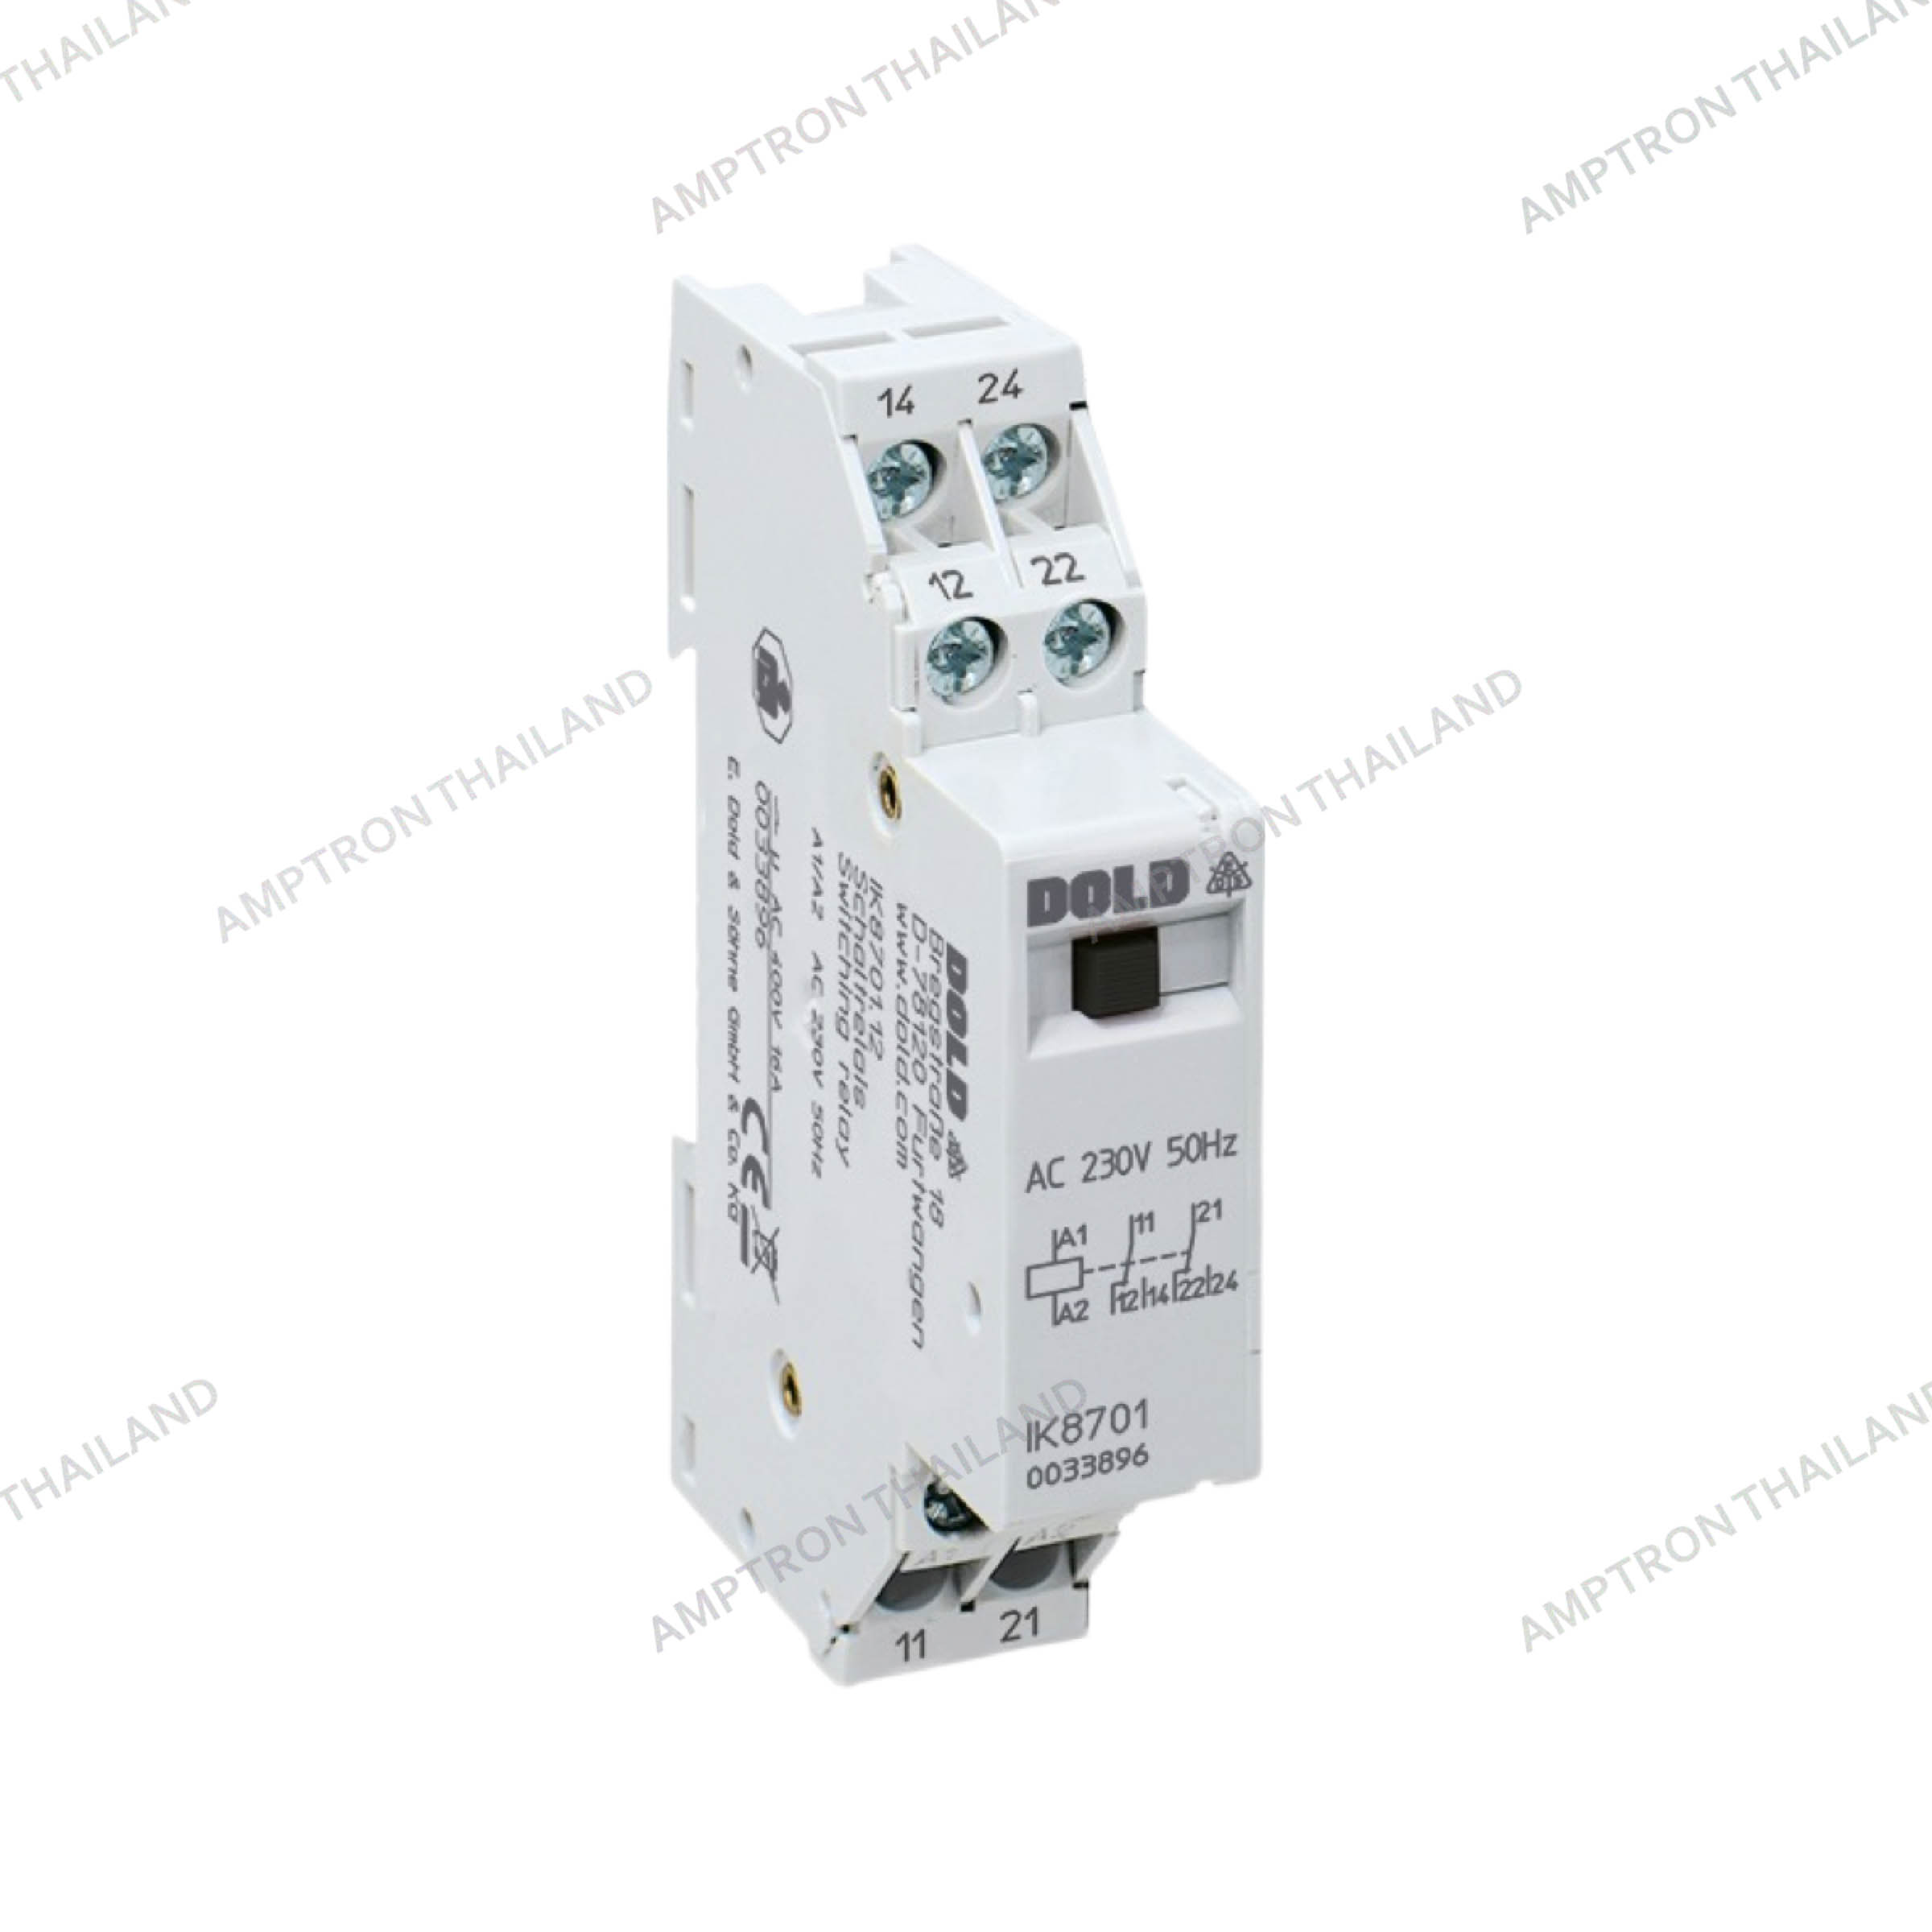 IK 8701  Switching Relay Input-Output Interface Relay